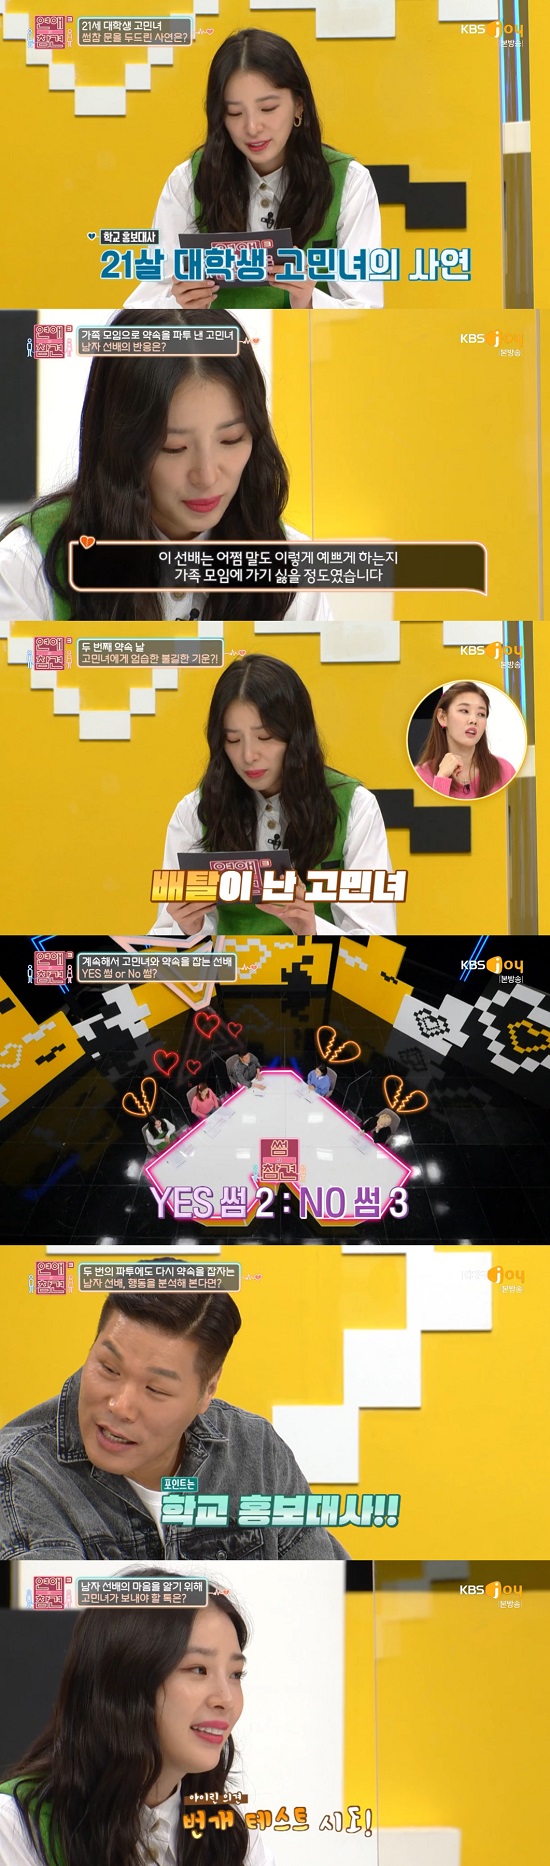 In the 116th KBS Joy entertainment program Loves Intervention 3 broadcasted on the 22nd, model Irene appeared as a special MC.On the day of the broadcast, Irene said, I did not watch TV well, but I watched this program often.Kim Sook asked, Is it a style to see in the insider, or a style to see while understanding and empathizing?I see it in anger and annoyance, Irene replied, adding, Im curious again while Im channeling.Just let me know one of the worst male episodes of all the men Friends, Kim Sook asked.I think there is something similar to the story of this program, Irene said. When I met for three months, I lost contact at all. 24 hours, one day.So Seo Jang-hoon replied, Suddenly I met someone, and Kim Sook added, Who met.So, when I saw it, I was playing with women, Irene replied.In the Thumbs Interference corner, Irene continued to introduce the story with Seo Jang-hoon.Irene introduced the story of a 21-year-old college student who became a public relations ambassador for the school and made a promise to a man who became acquainted with a public relations ambassador twice.The first appointment was due to family gatherings, and the second appointment was due to the stomachache on the day.If you are promised twice, do you want to see me?I thought, but I felt more than grateful for the appearance of my senior who rescheduled me without any annoyance.What is your mind that wants to meet me like this? Han Hye-jin, Seo Jang-hoon, for No Thumb, Yes Thumb, Kwak Jeong-eun, Kim Sook, and Irene chose No Thumb.This is about to do NO Thumb, but I read the first line, its called school ambassador, said Seo Jang-hoon, and Han Hye-jin, is really sharp.Its creepy, he said, admiring the news.Seo Jang-hoon continued to analyze the sharp analysis, saying, If the school ambassador is beautiful, the male senior will have already lost his mind to some extent.Han Hye-jin reads the story of the troubles again and tells the troubled woman who delayed the promise twice, Do not you want to say Shall we meet next month?How can I be more desperate than this? Irene said, If I was a troubled woman, I would have contacted the friends to have a drink, and I think I could come.I think it will be okay to test such lightning a little. Photo: KBS Joy Loves Intervention 3 on the screen